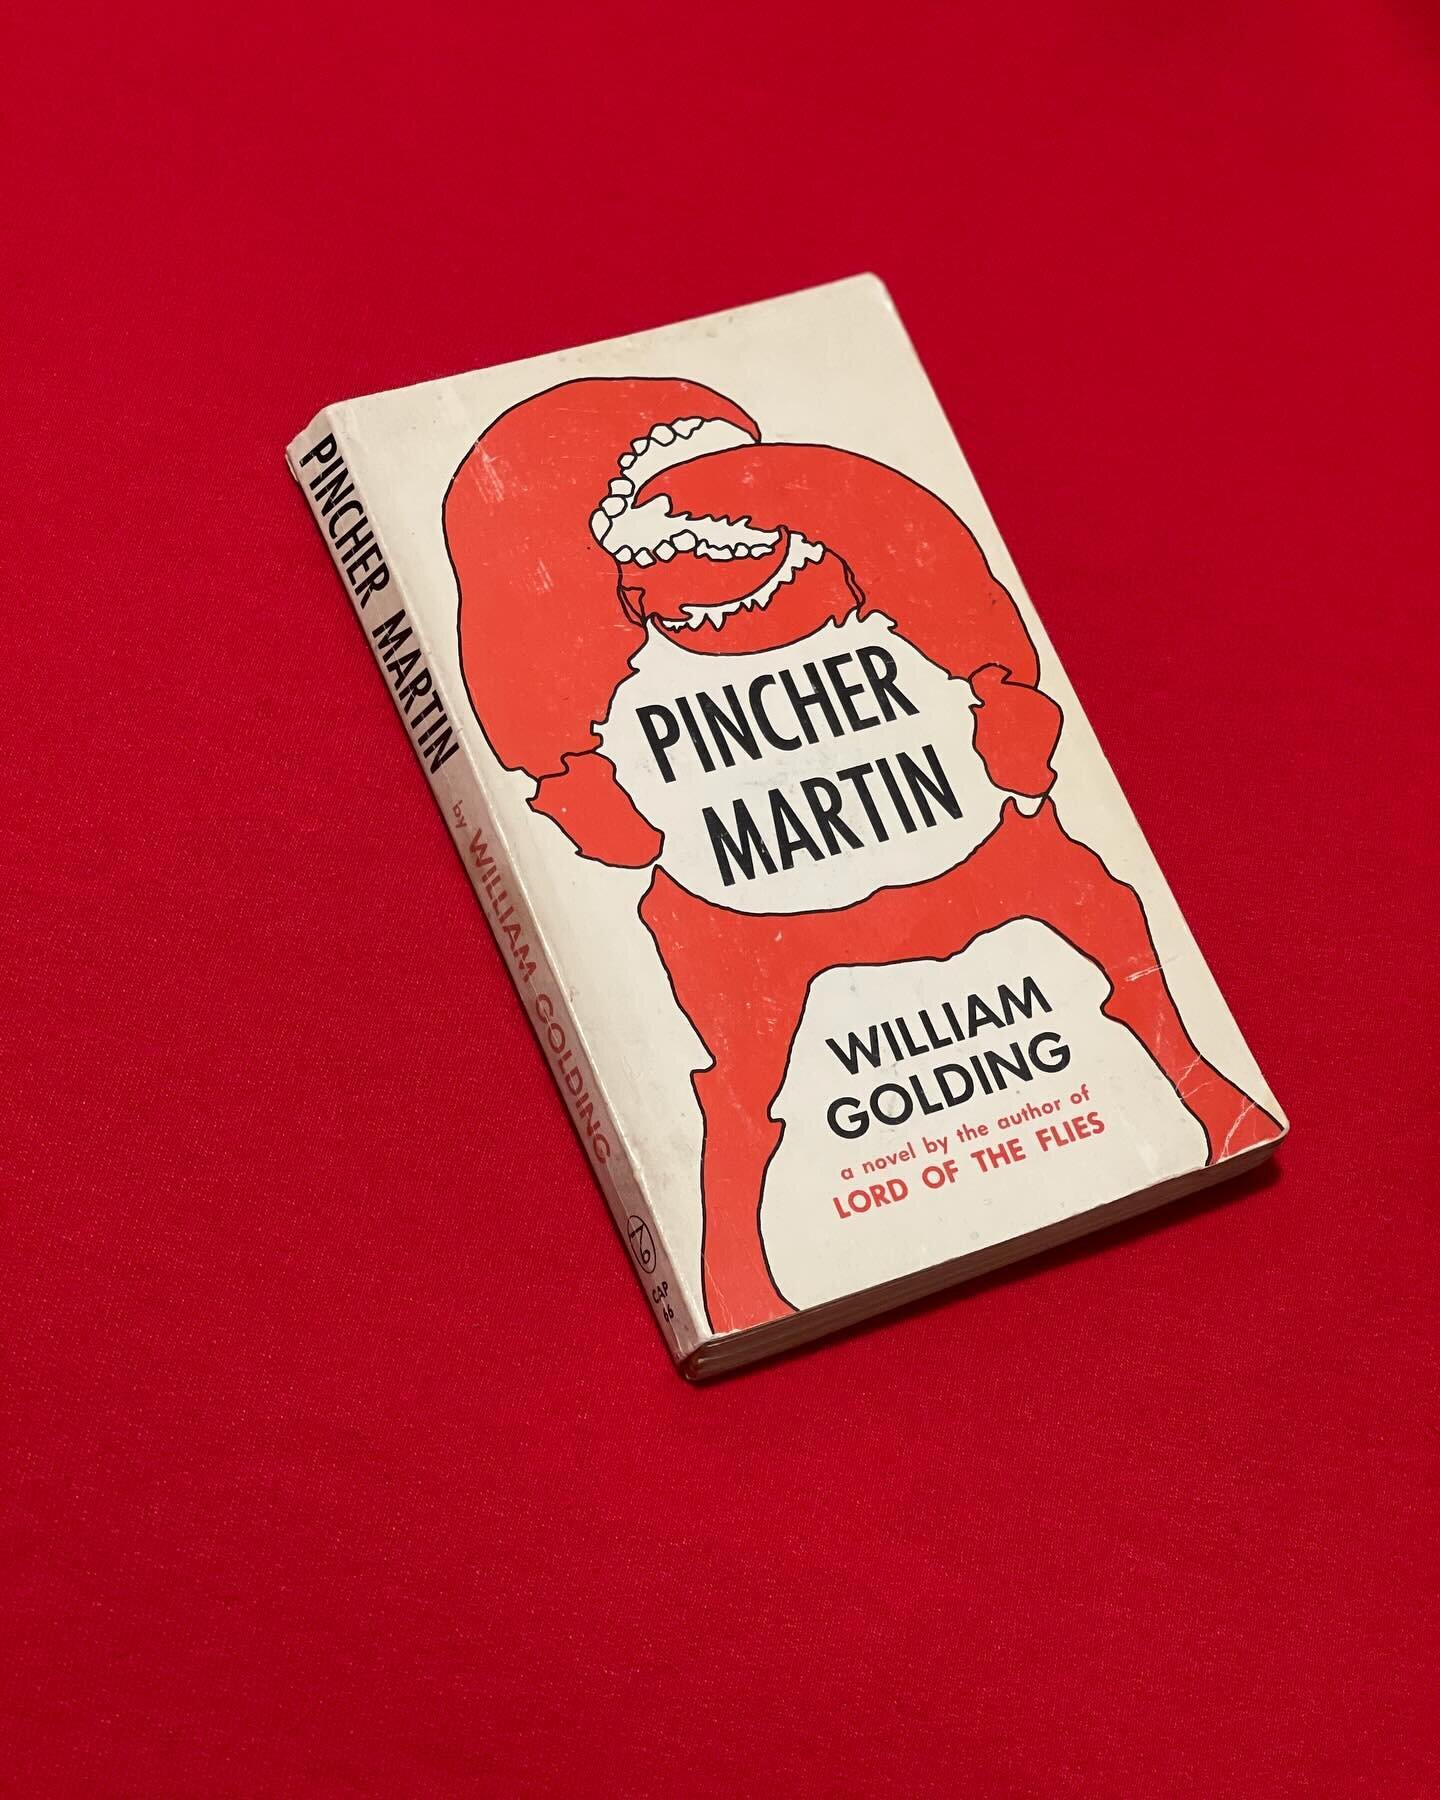 William Golding, Pincher Martin (1956).
:
Read it, kept reading it, drowned in it, struggled to stay afloat, then read it on the subway, read it on the bus, read it on the flight, cracked the spine and read it till I swam to a shore, or rather an isl